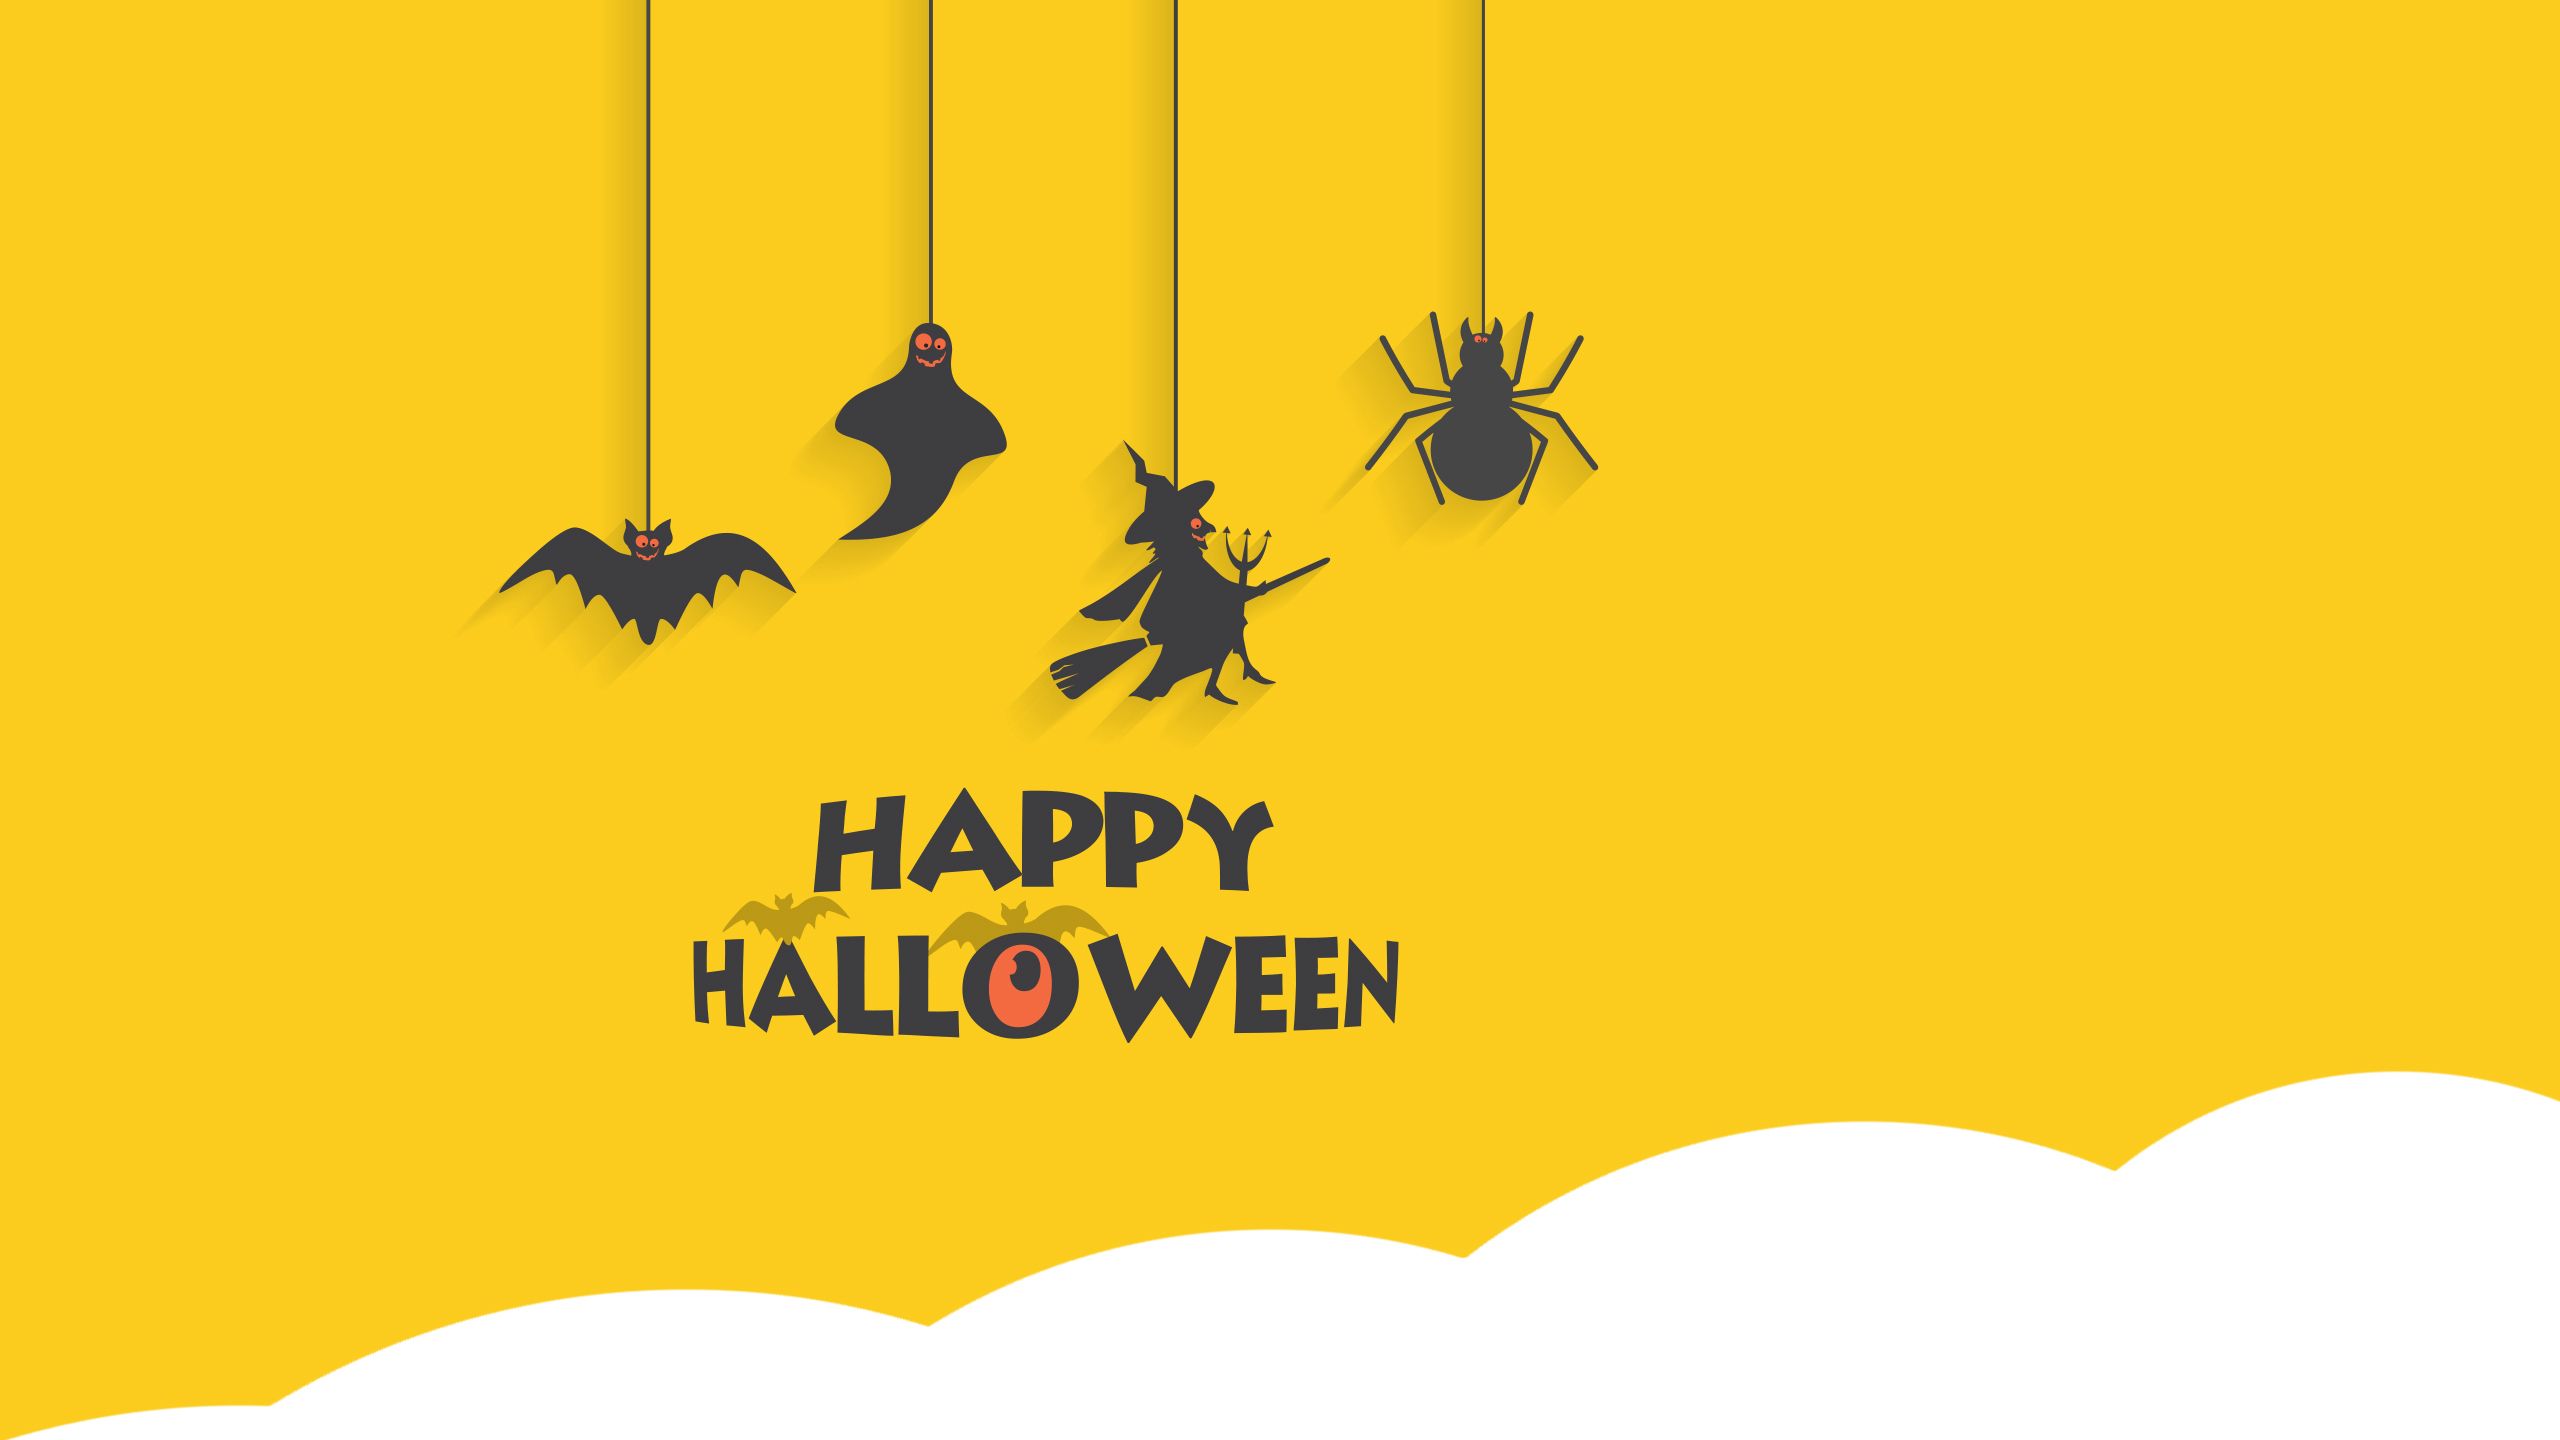 Wallpaper Happy Halloween, Minimal, Yellow, HD, Celebrations / Halloween,. Wallpaper for iPhone, Android, Mobile and Desktop